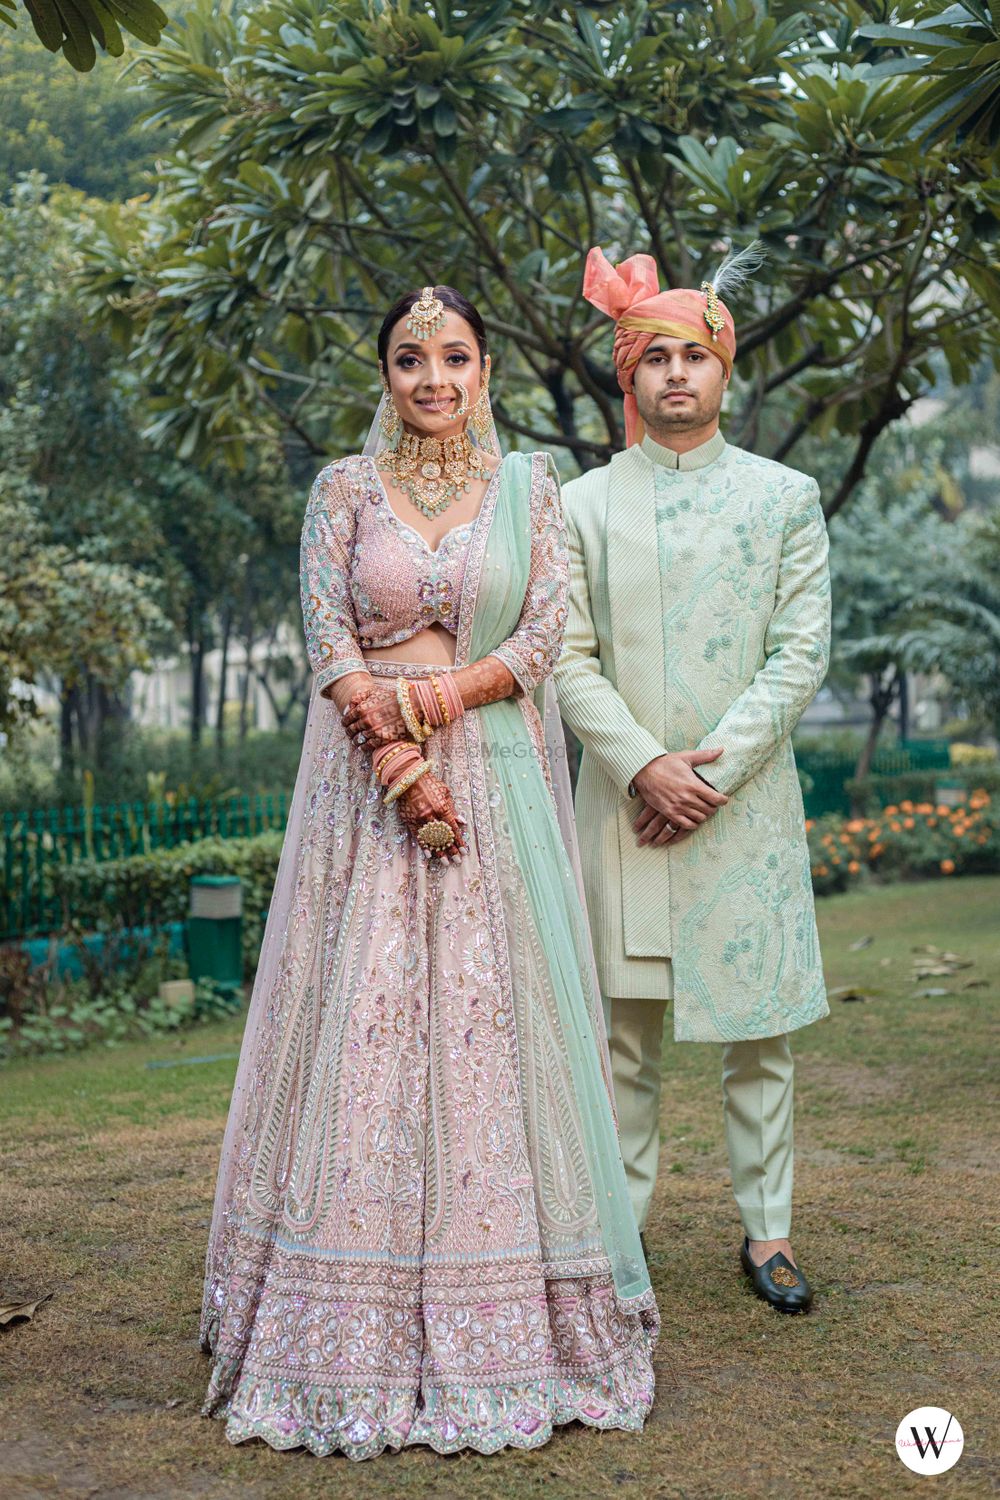 Photo of modern day wedding bride and groom looks in pastel outfits